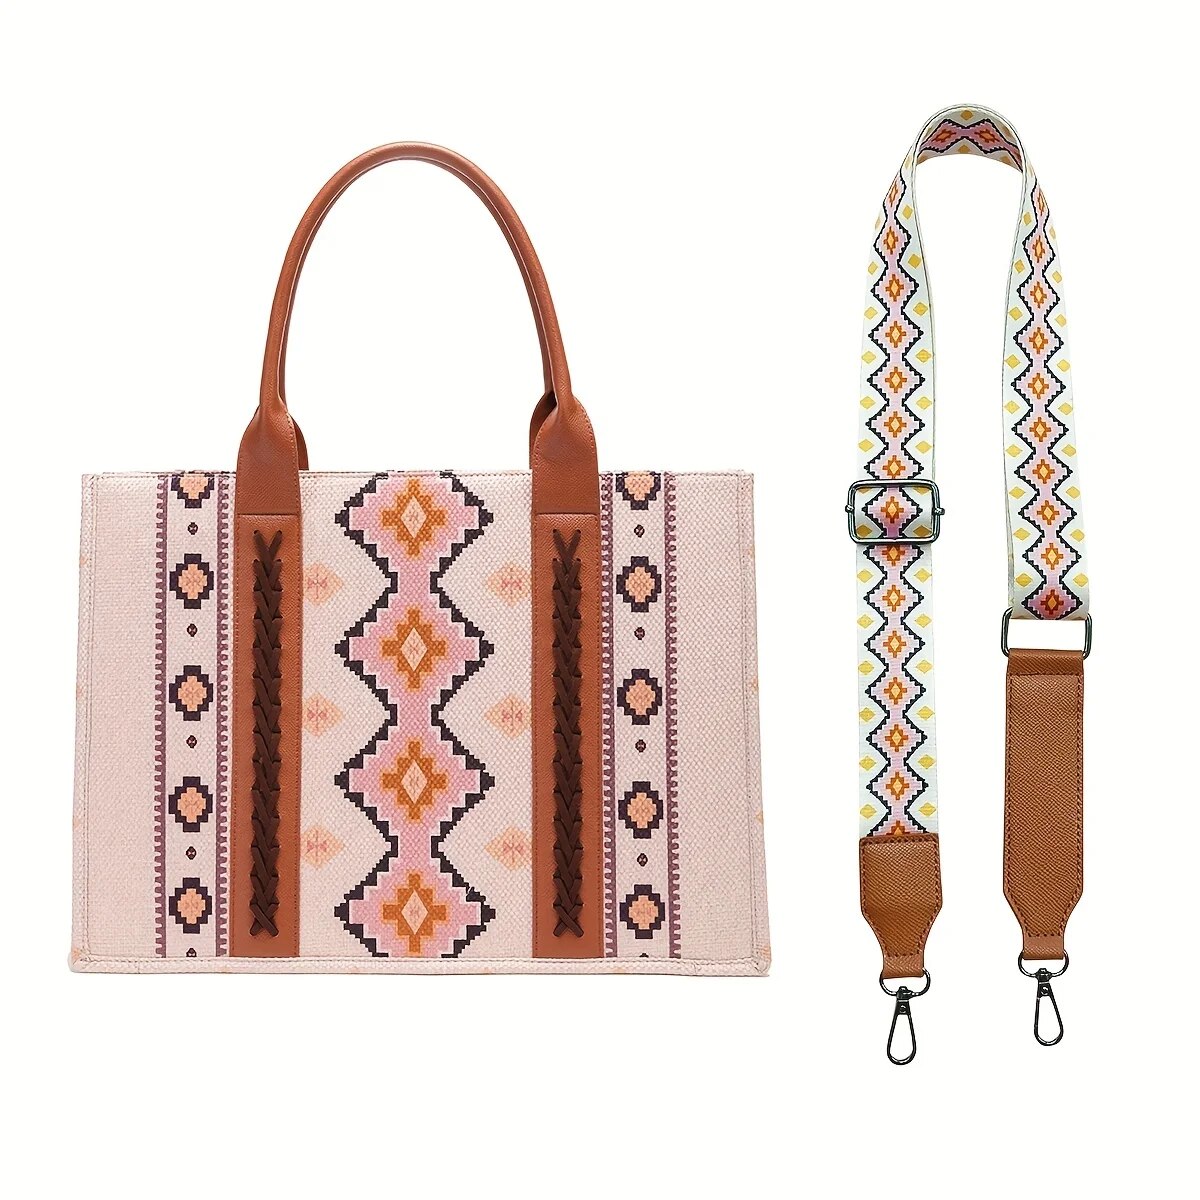 Shop All Of The Latest Bohemian Style Shoulder Bags And Totes